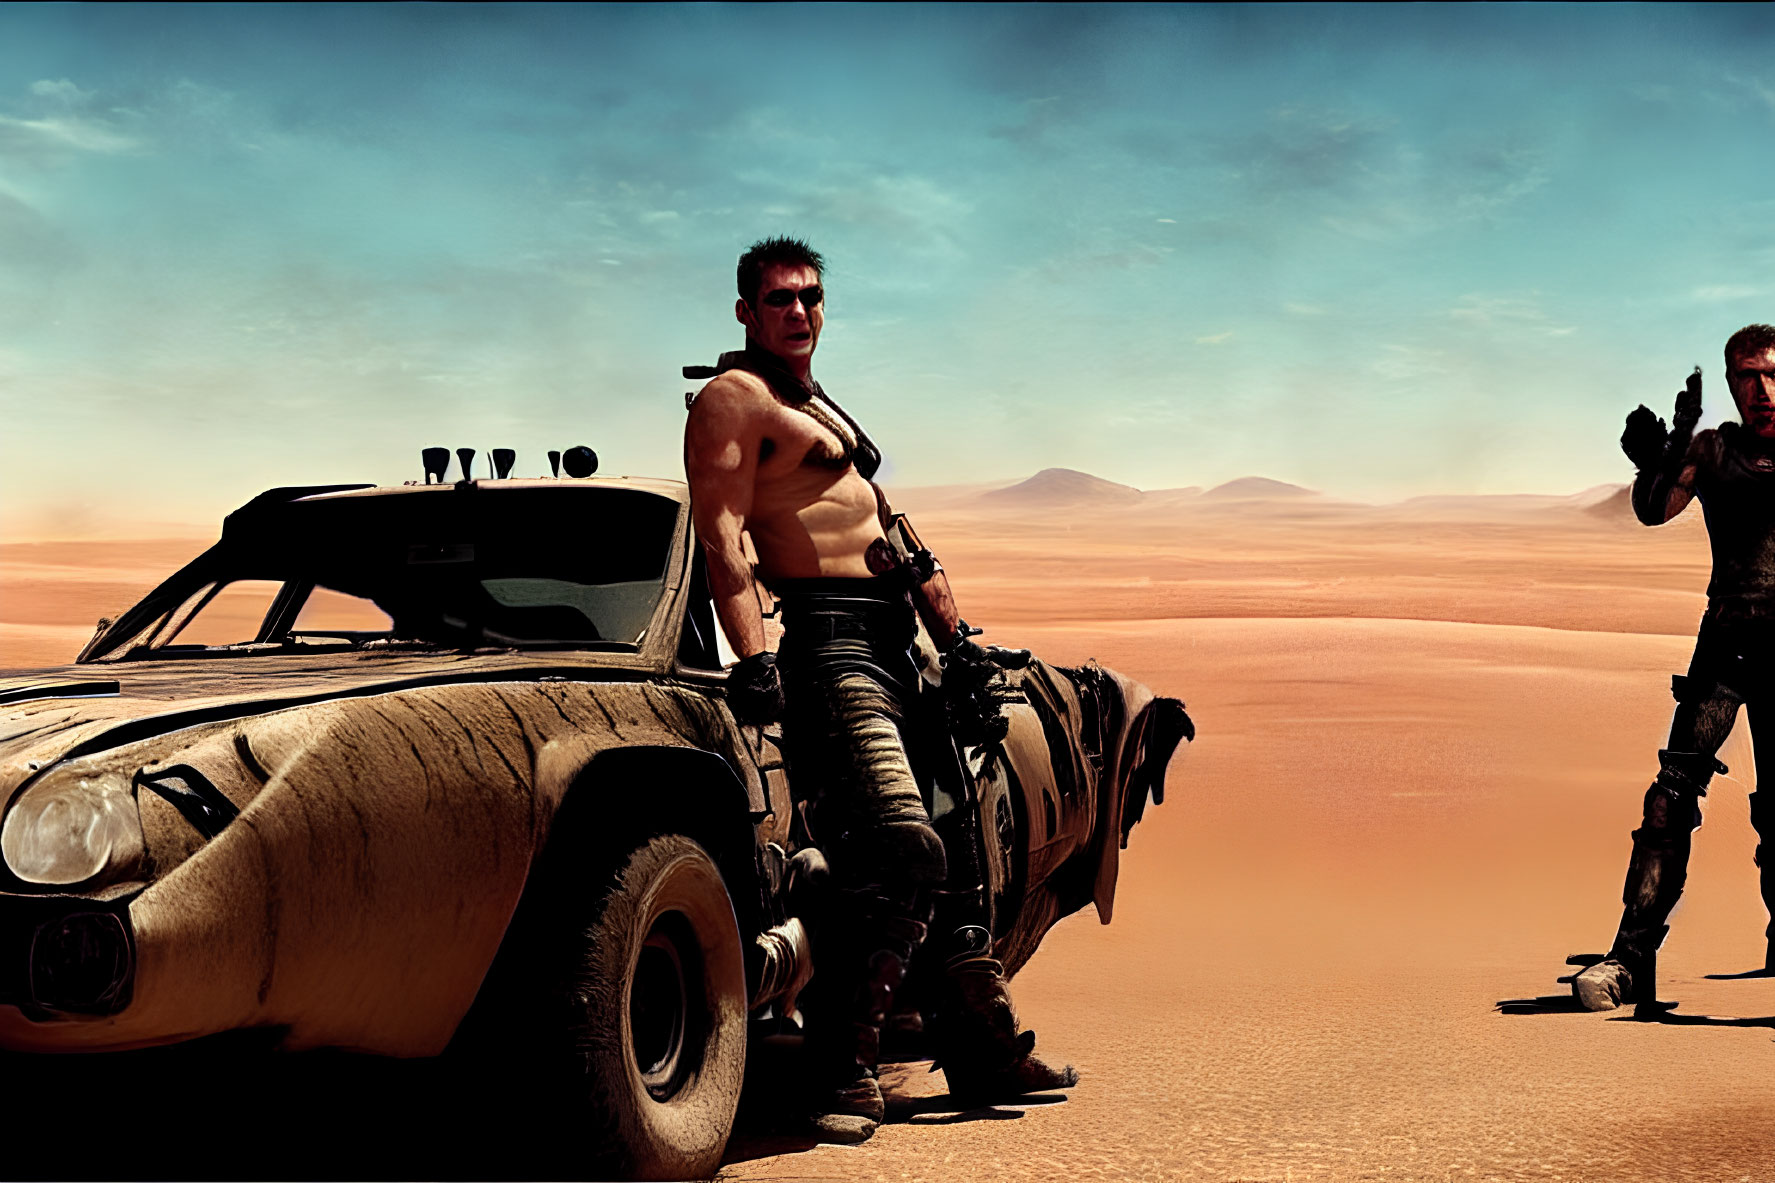 Muscular man with prosthetic arm in desert with rugged vehicle and armed companion